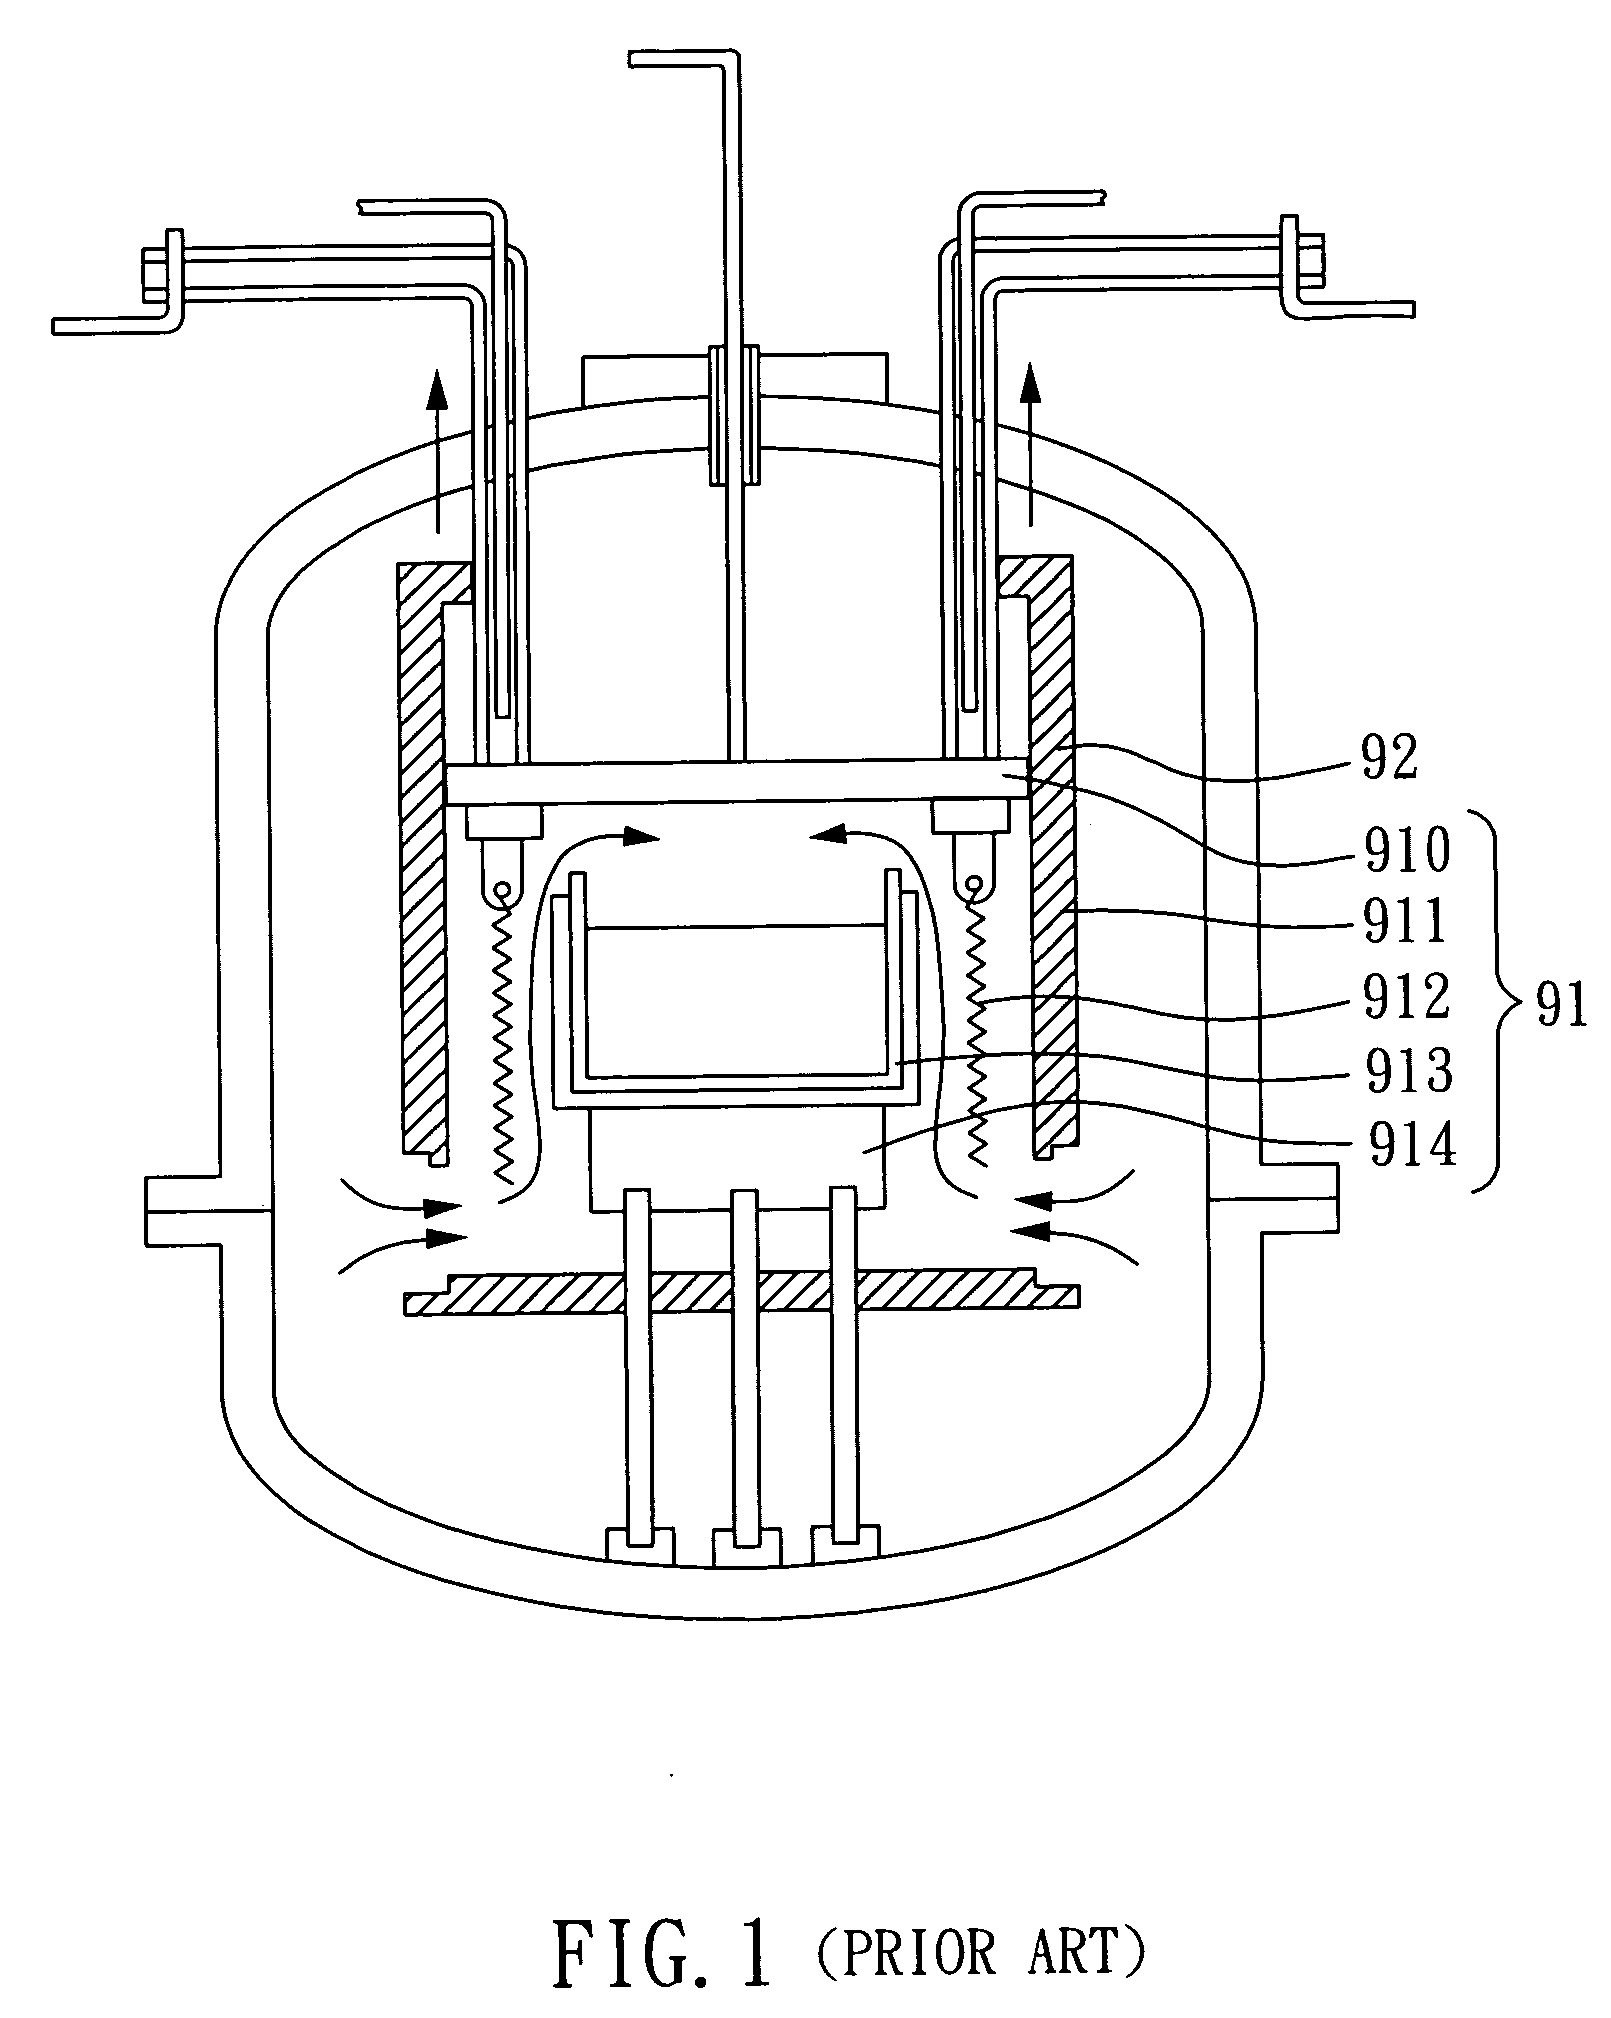 Crystal-Growing furnace with convectional cooling structure